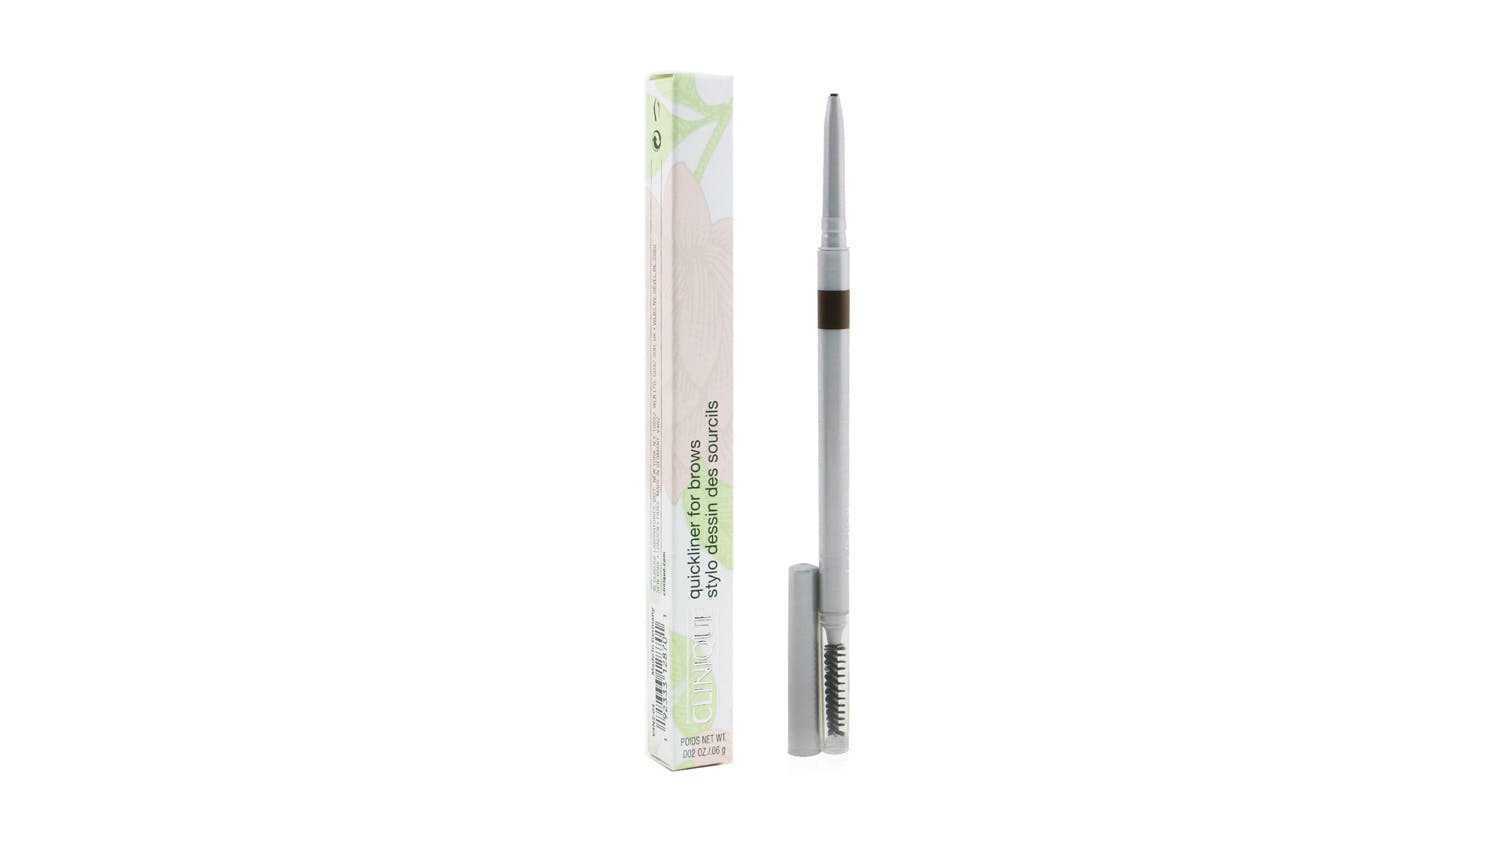 Quickliner For Brows - # 04 Deep Brown - 0.06g/0.002oz